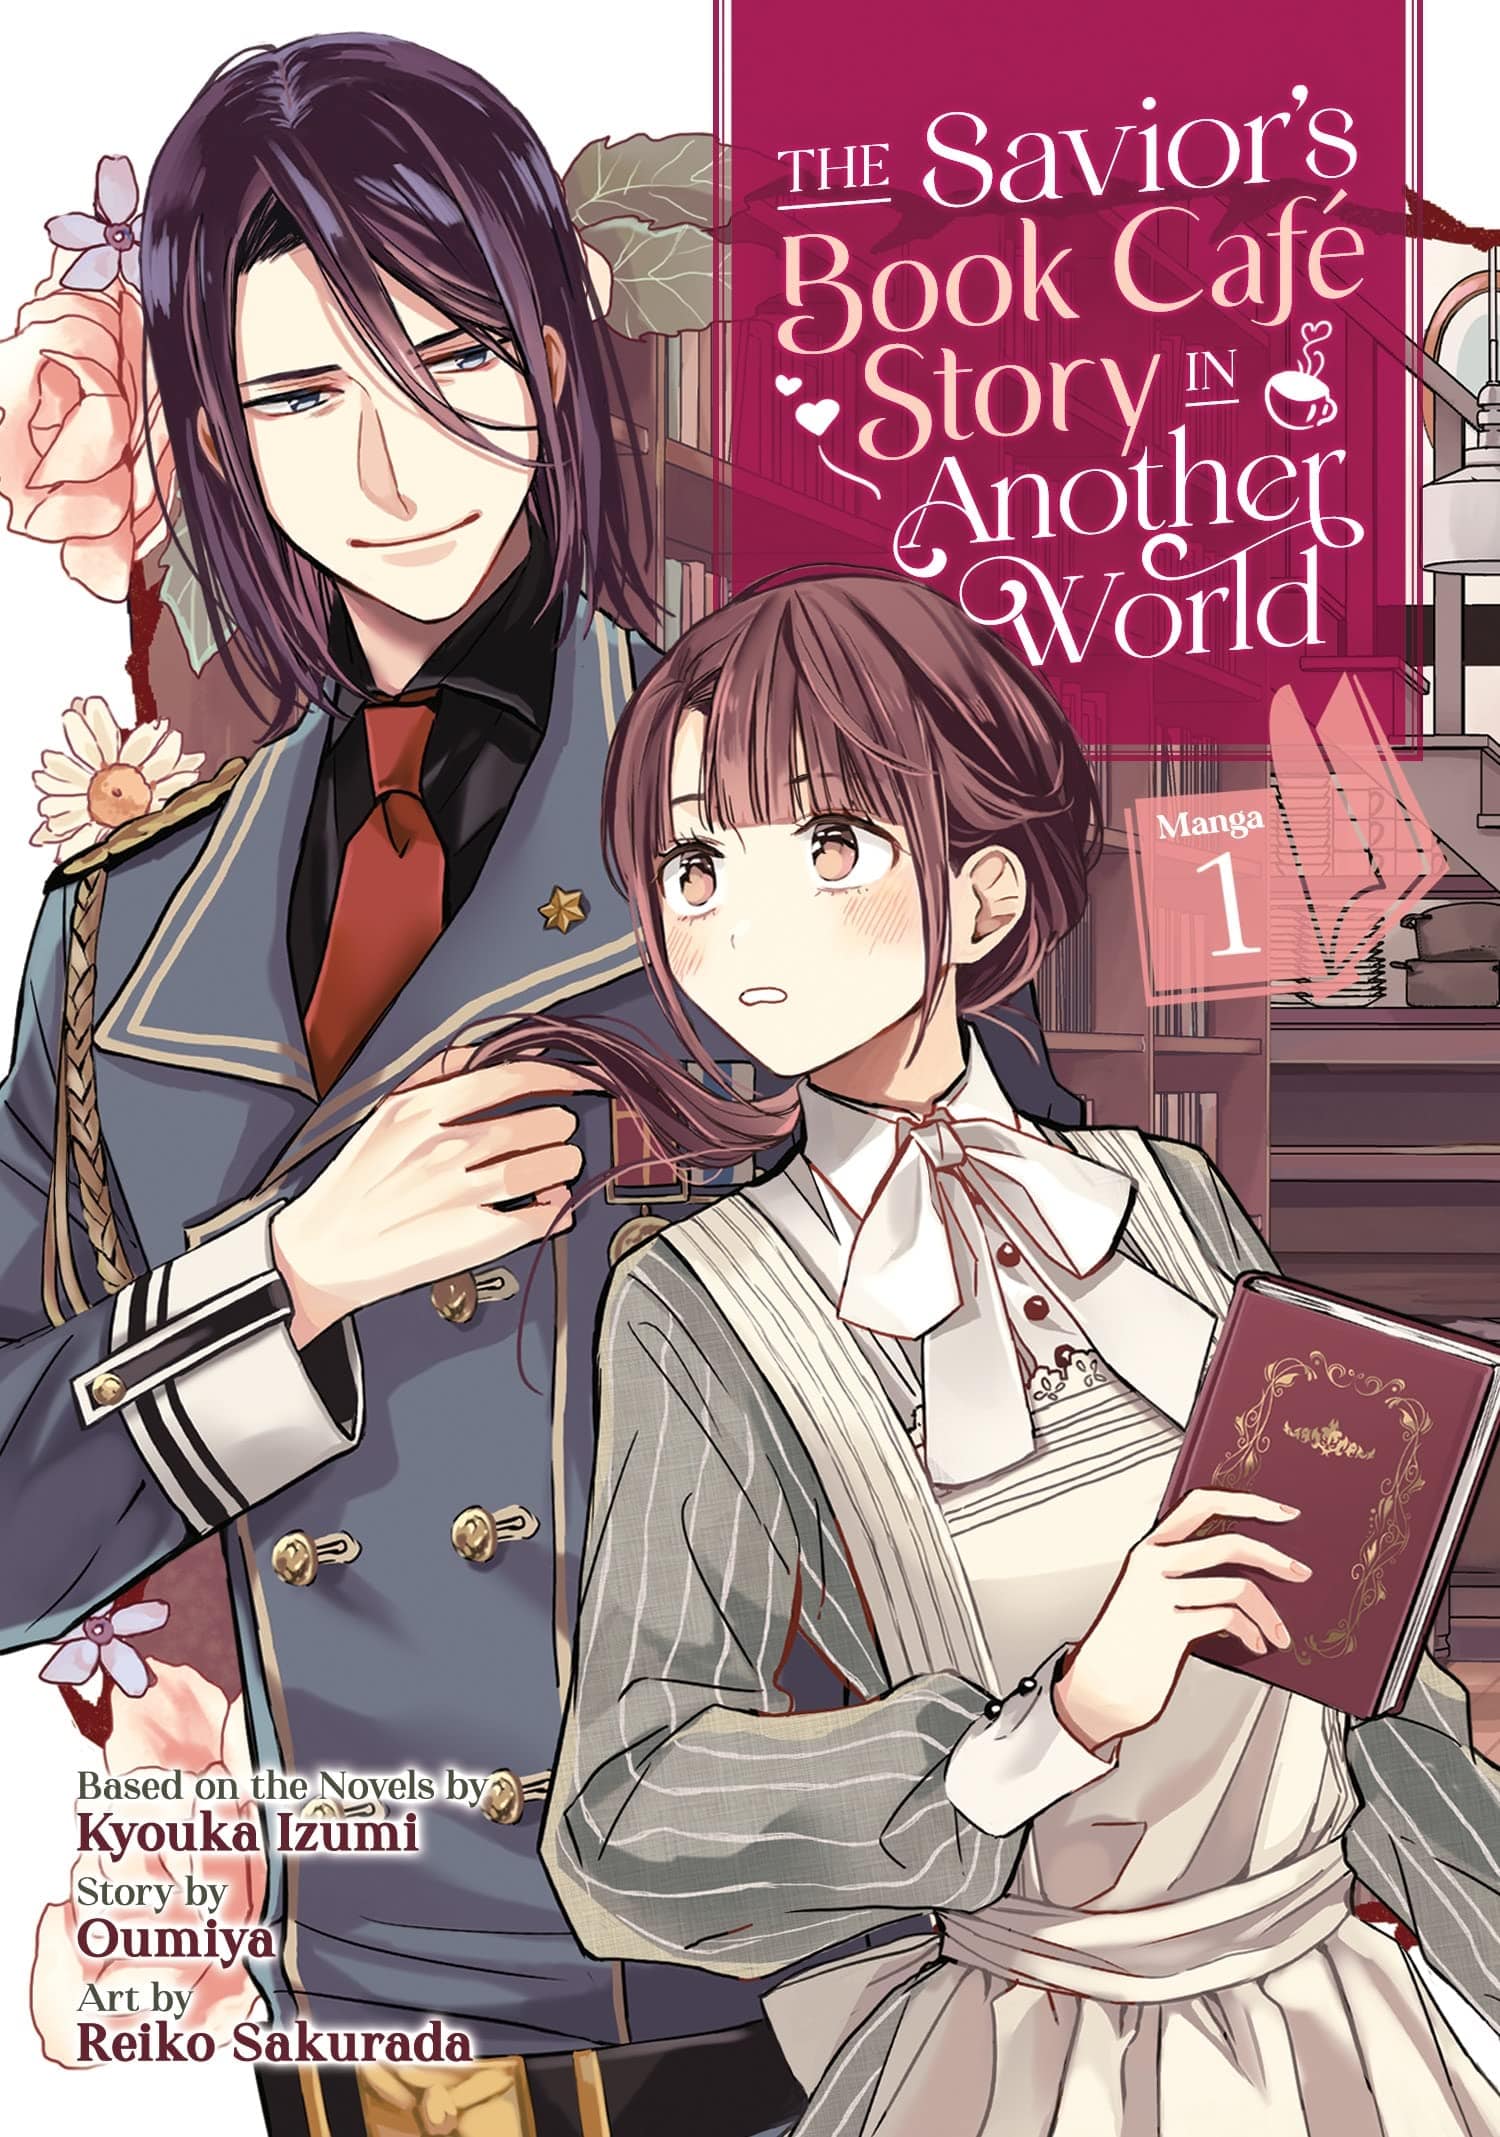 Savior's Book Cafe Story in Another World Vol. 1 - Third Eye